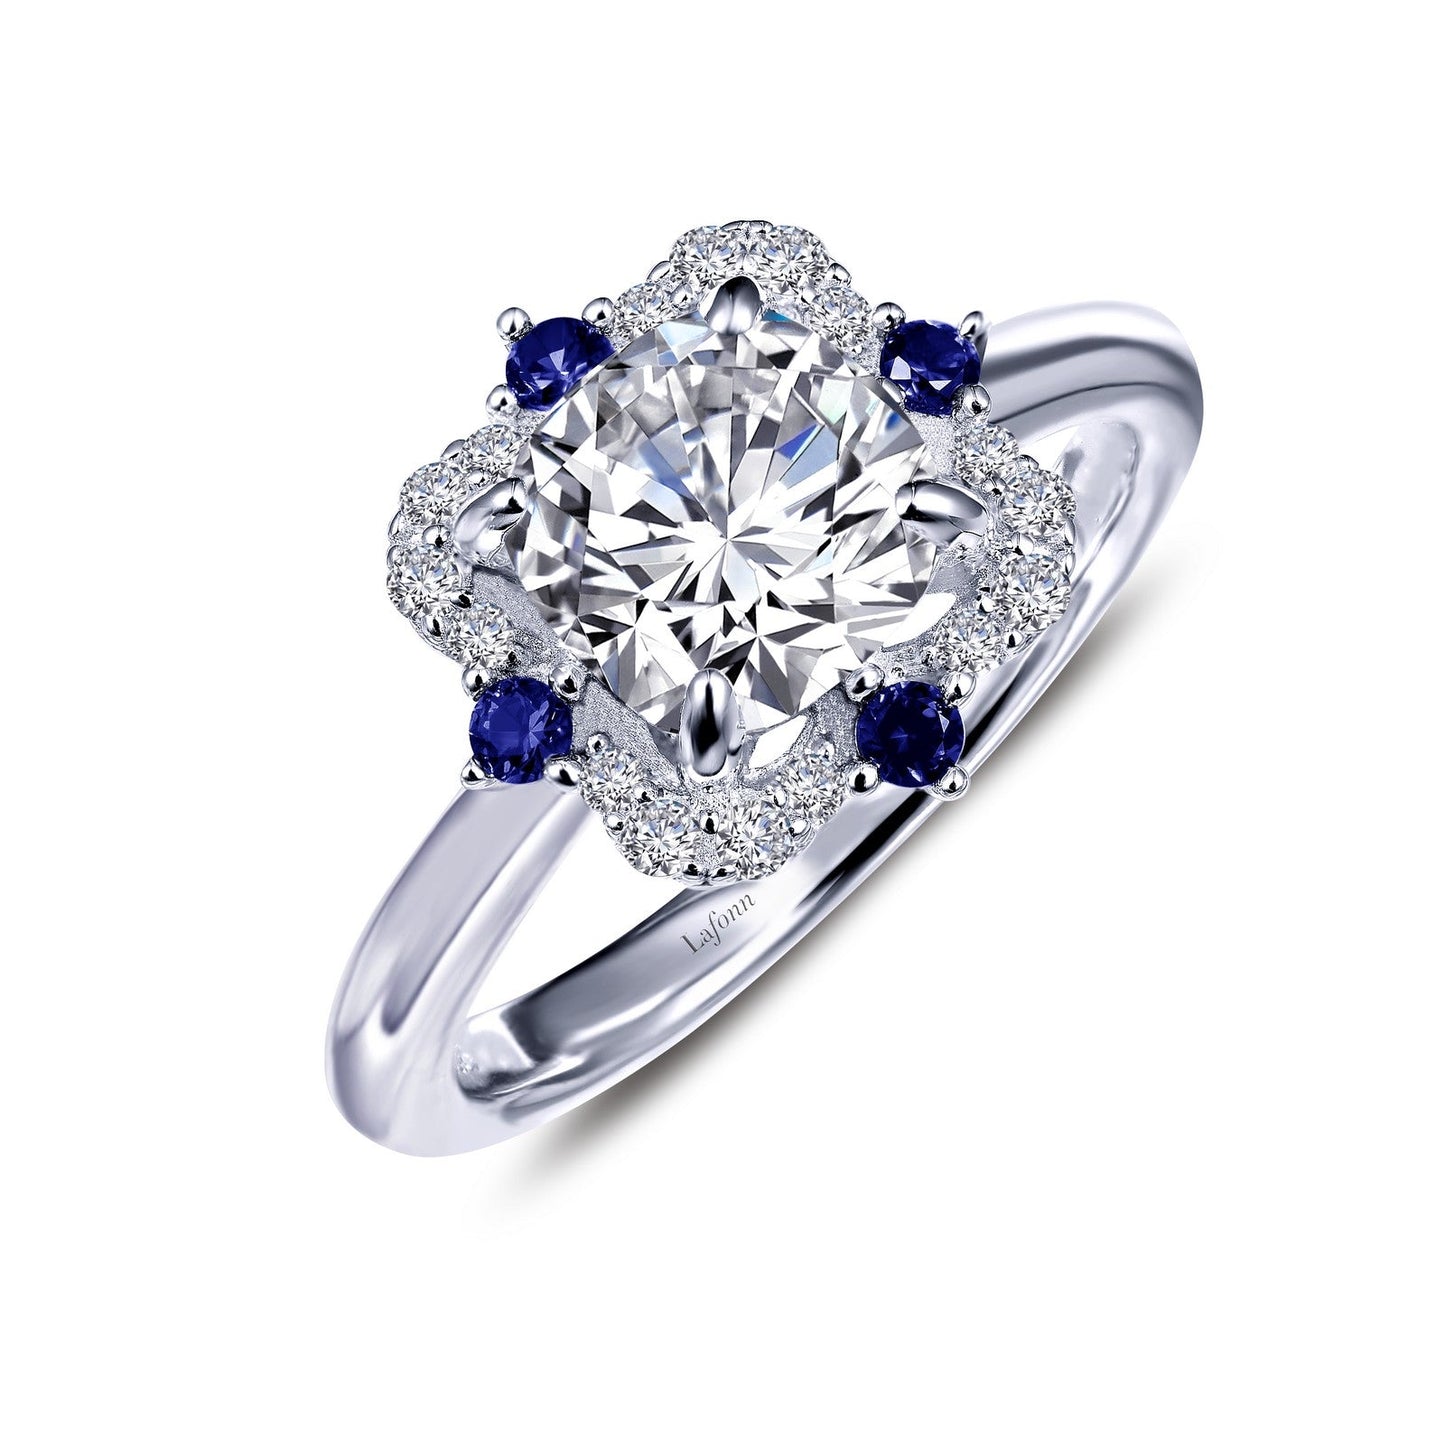 Load image into Gallery viewer, Lafonn Art Deco Inspired Engagement Ring 21 Stone Count R0227CSP05
